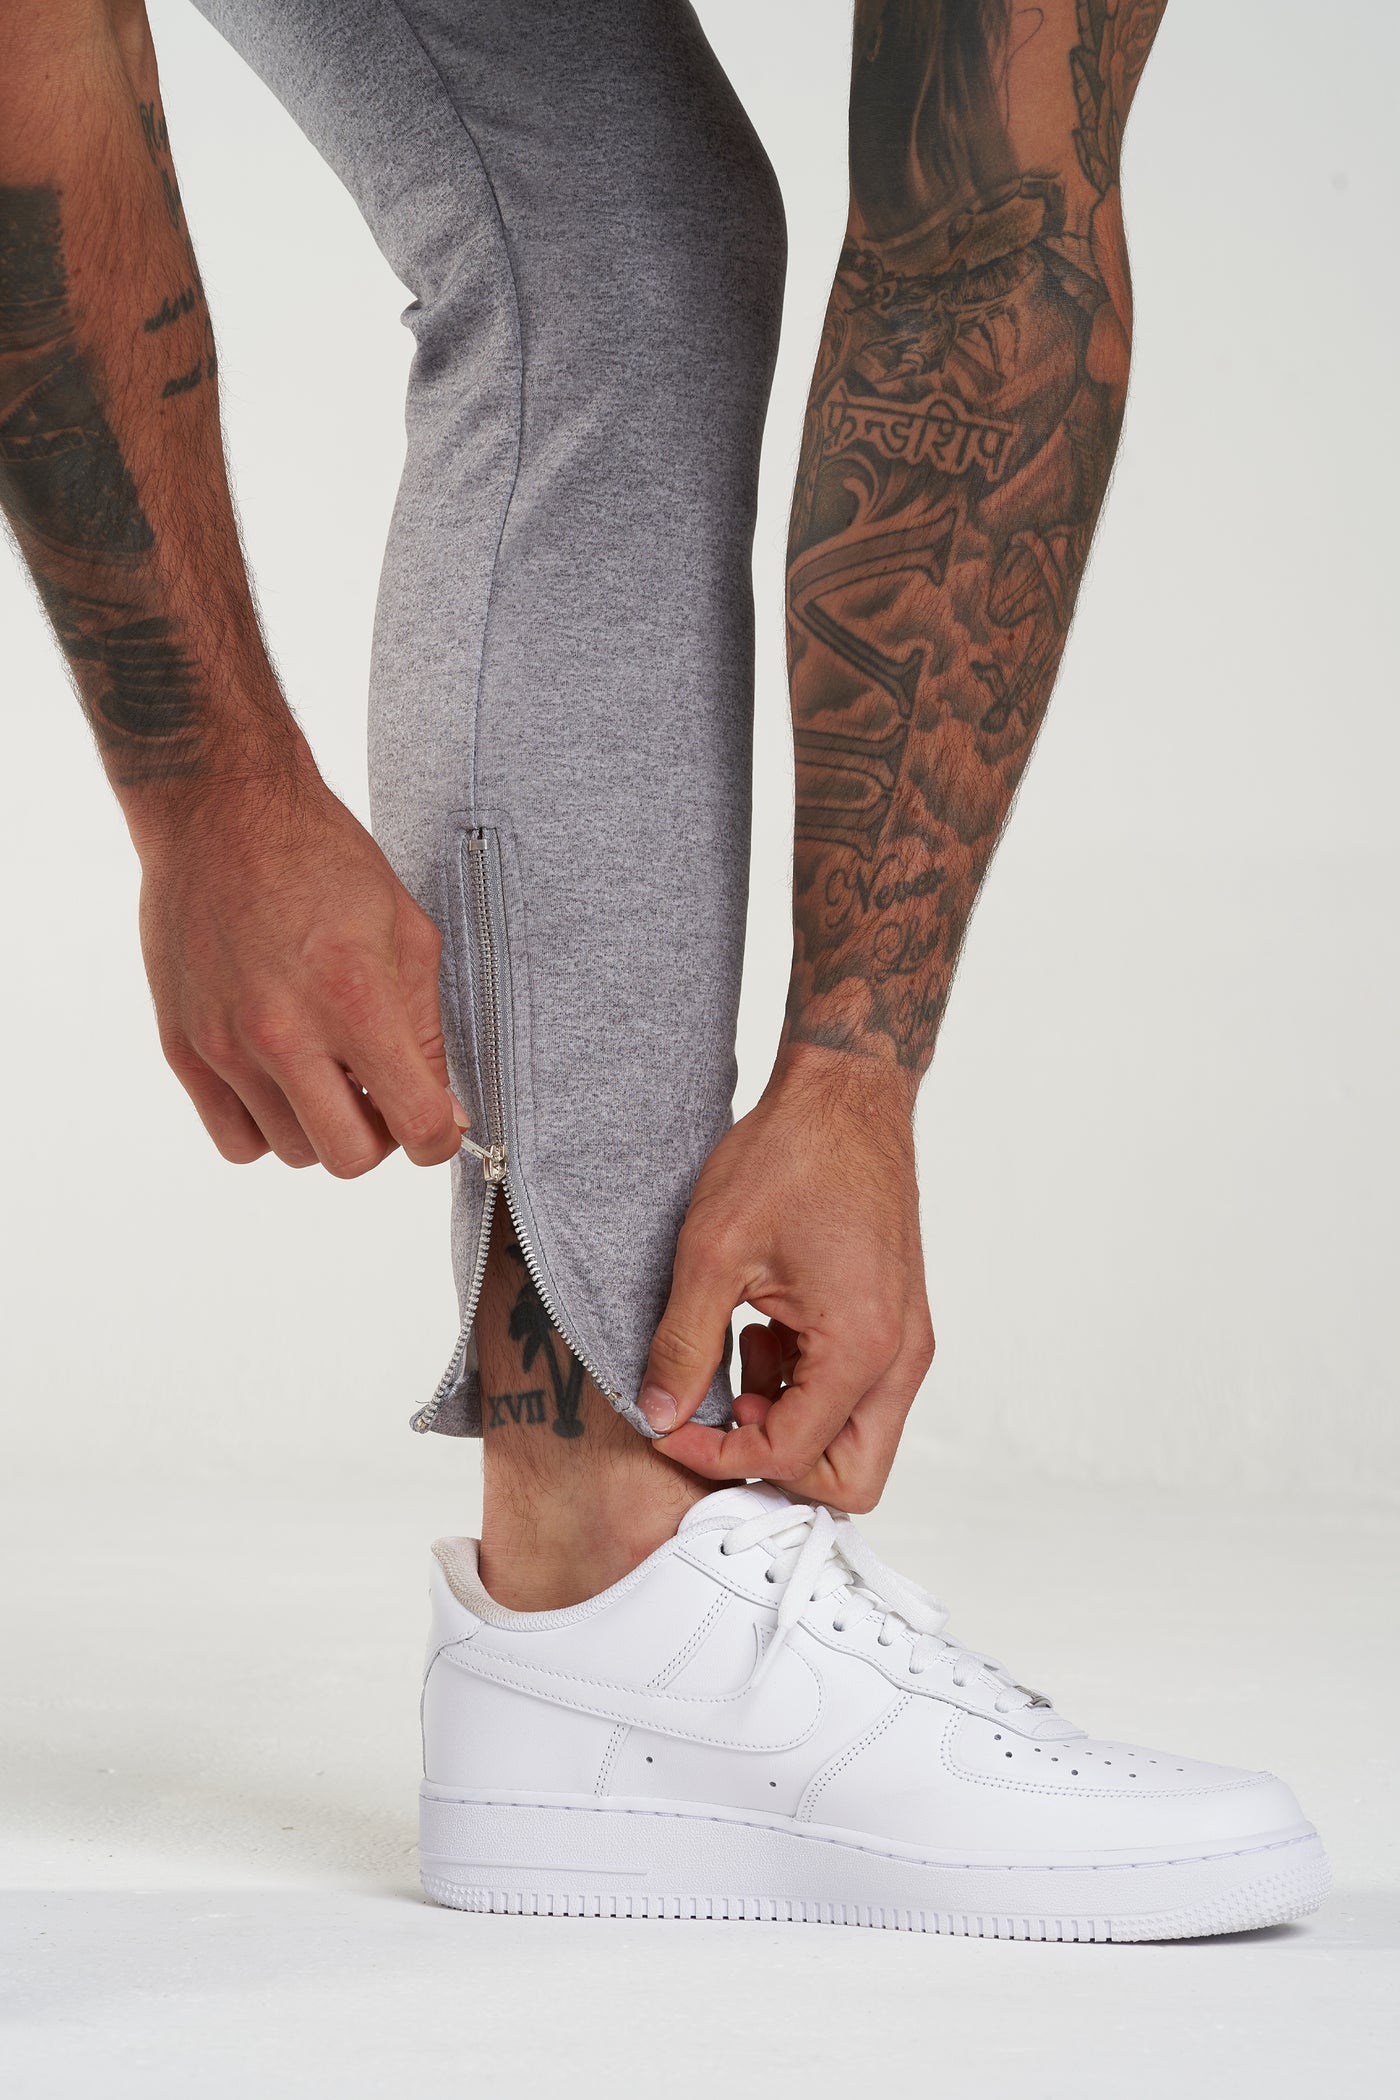 THE ICONIC TRACK PANTS - GREY - ICON. AMSTERDAM